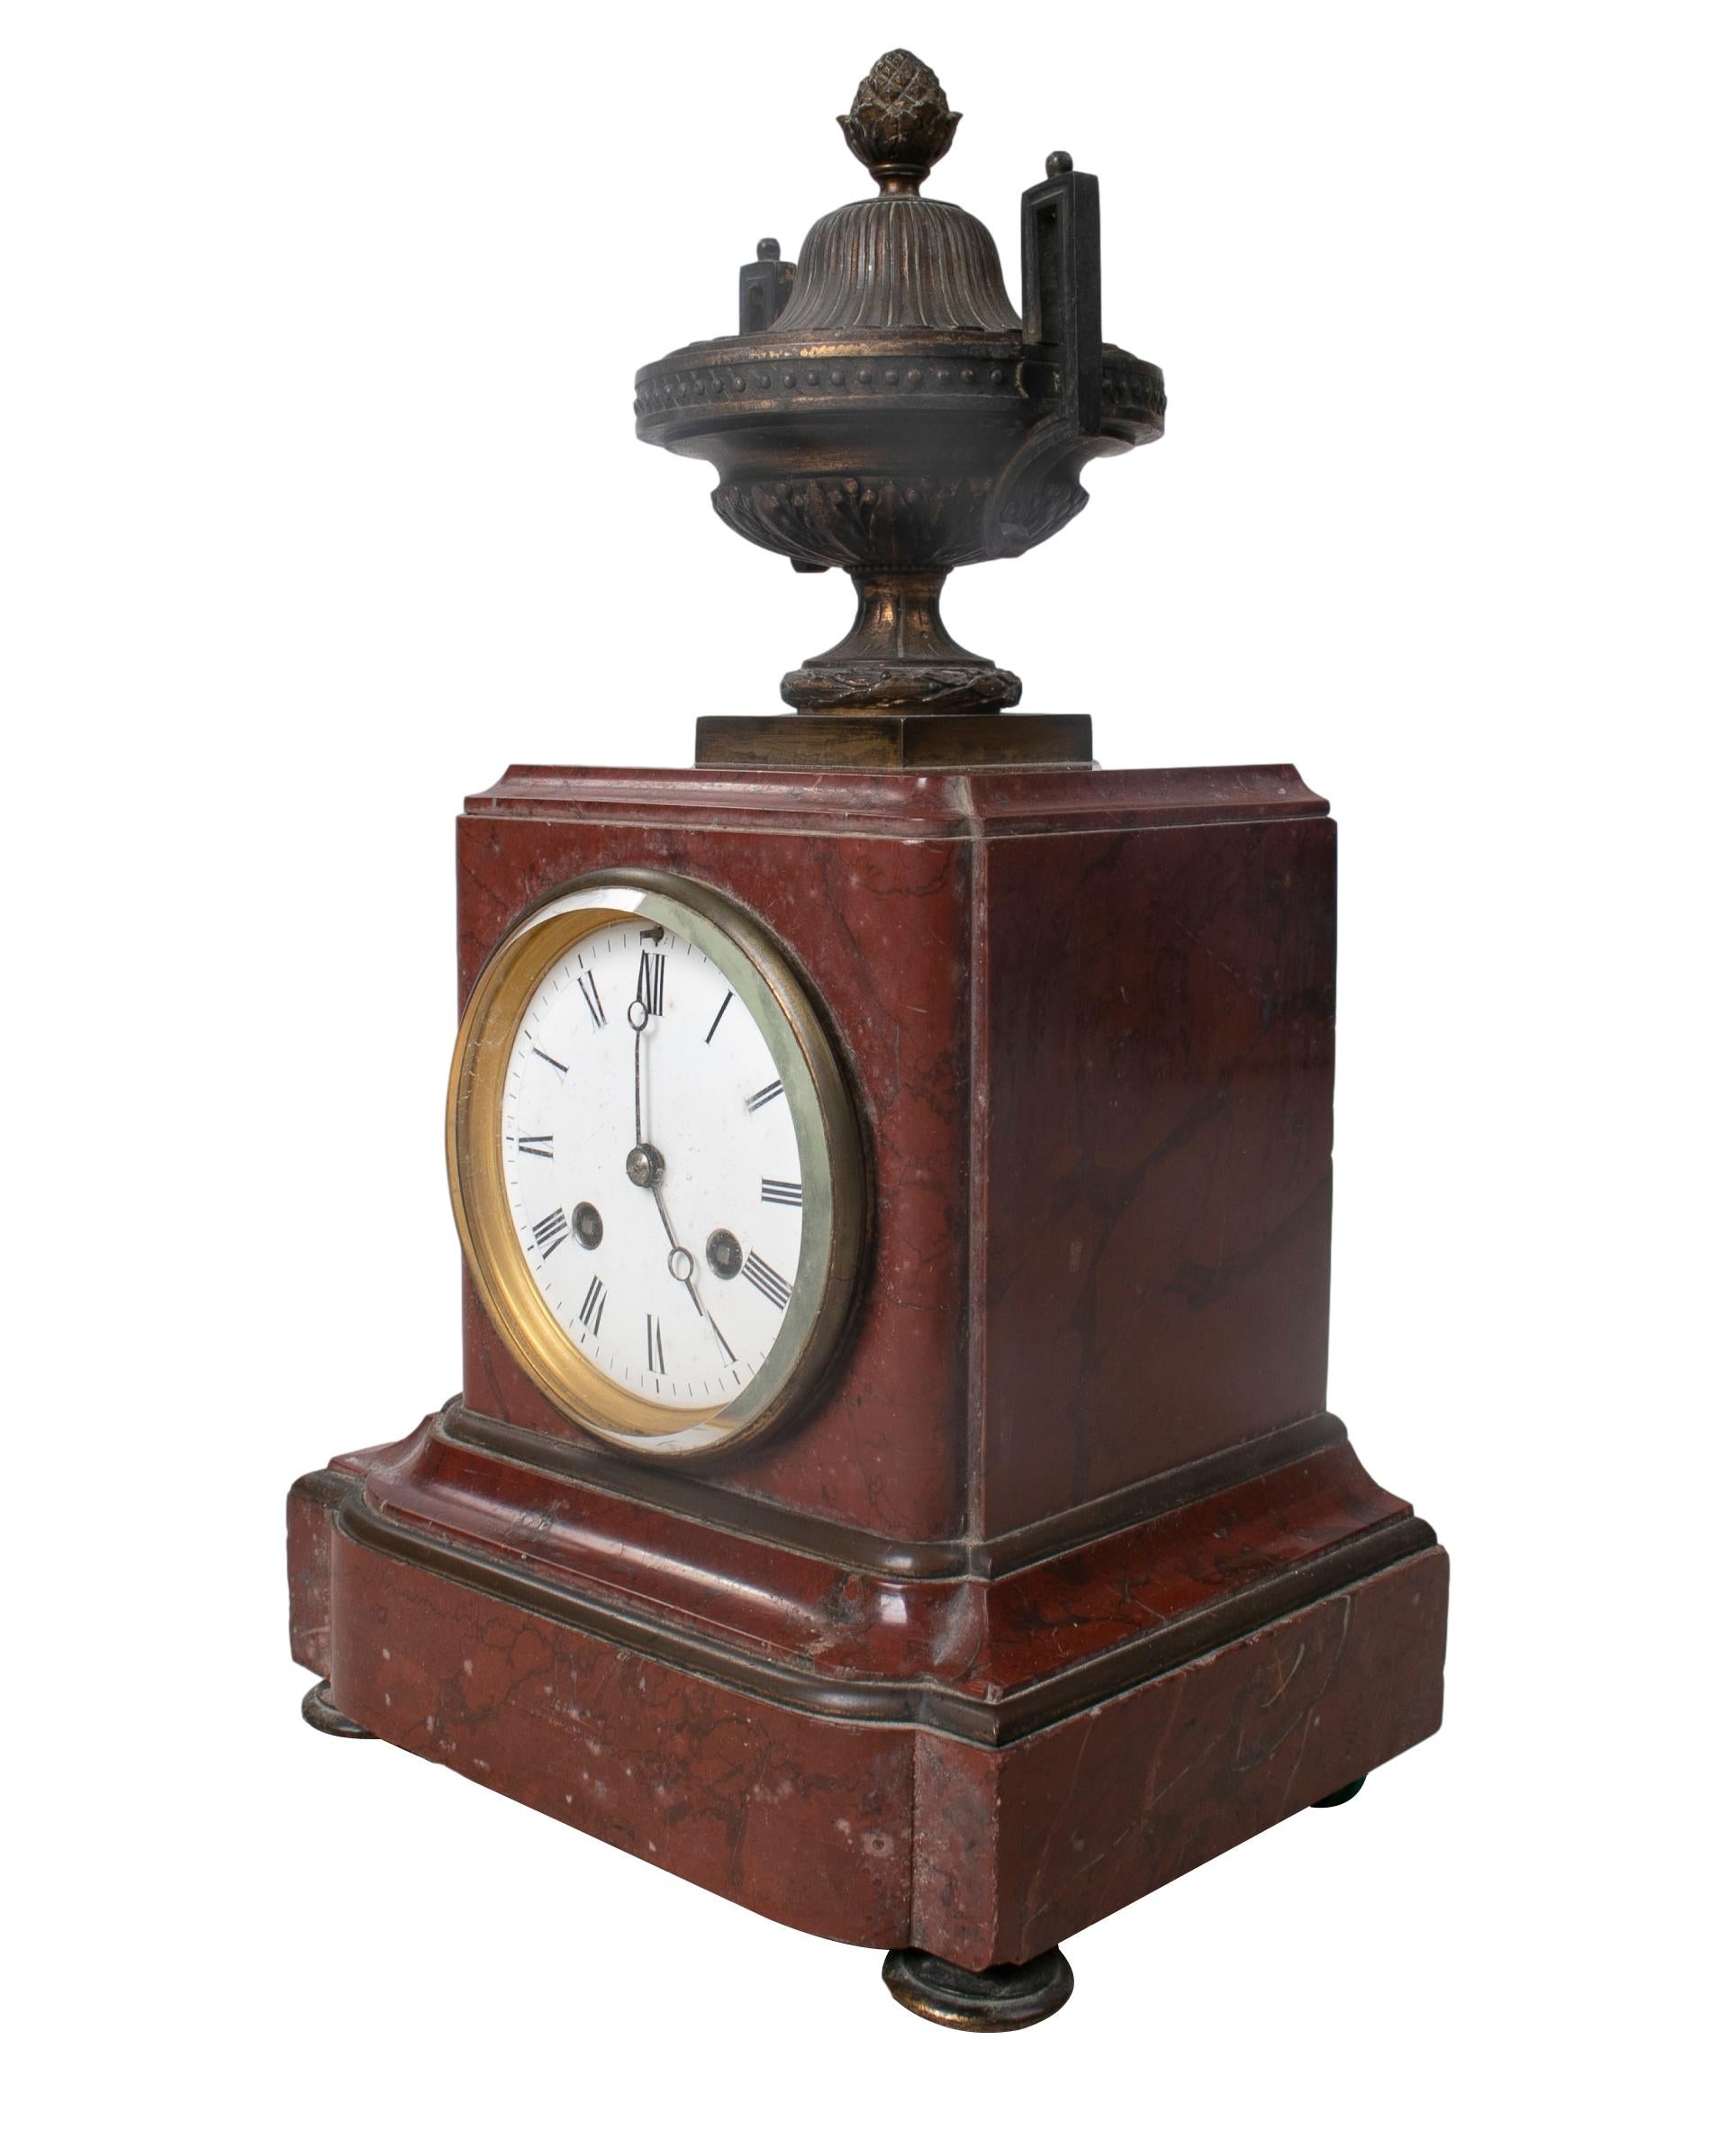 19th century French bronze urn and marble table clock.